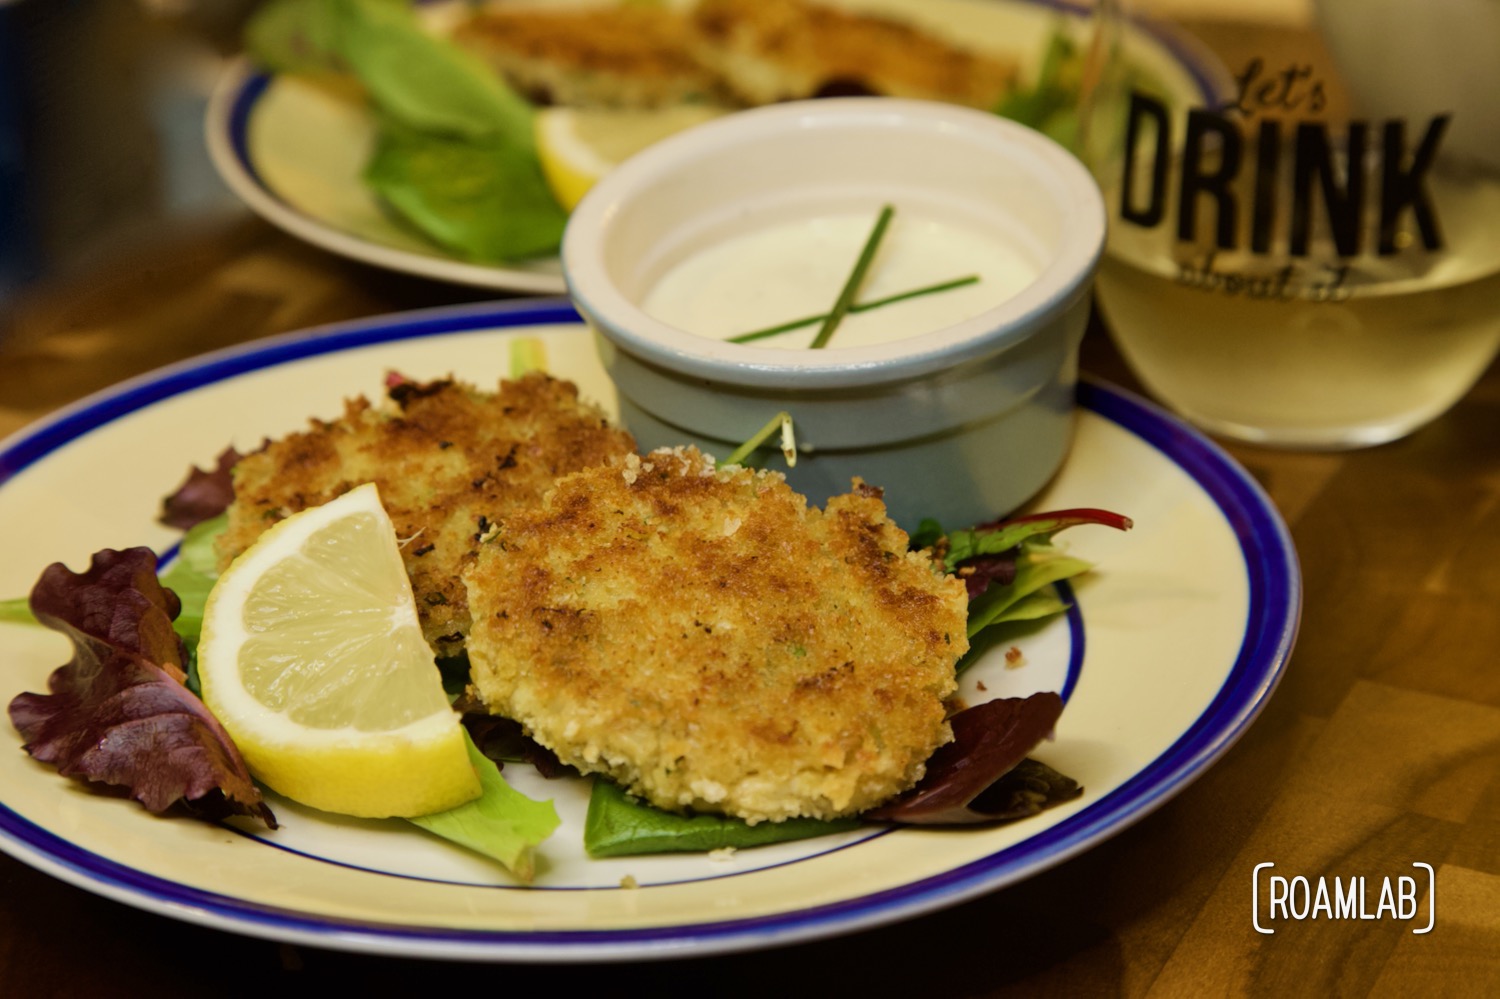 Spare can of crab meat? Try this simple, campfire approved, panko crusted crab cake recipe as an appetizer or pair it with a salad or soup for dinner.